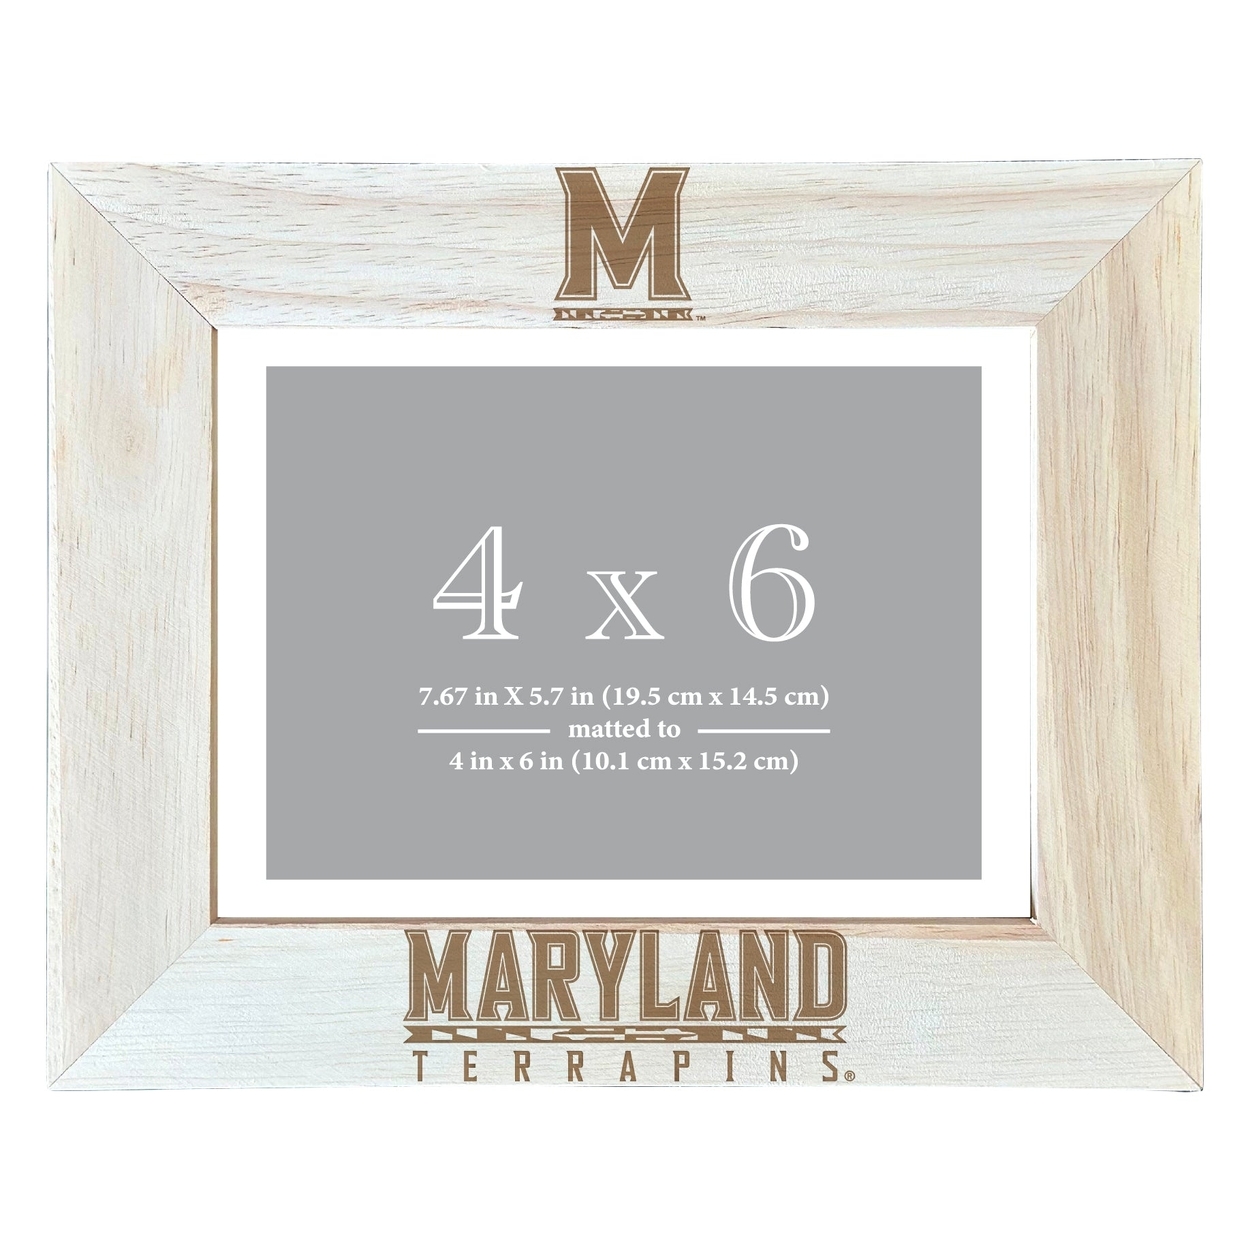 Maryland Terrapins Wooden Photo Frame Matted To 4 X 6 Inch - Etched